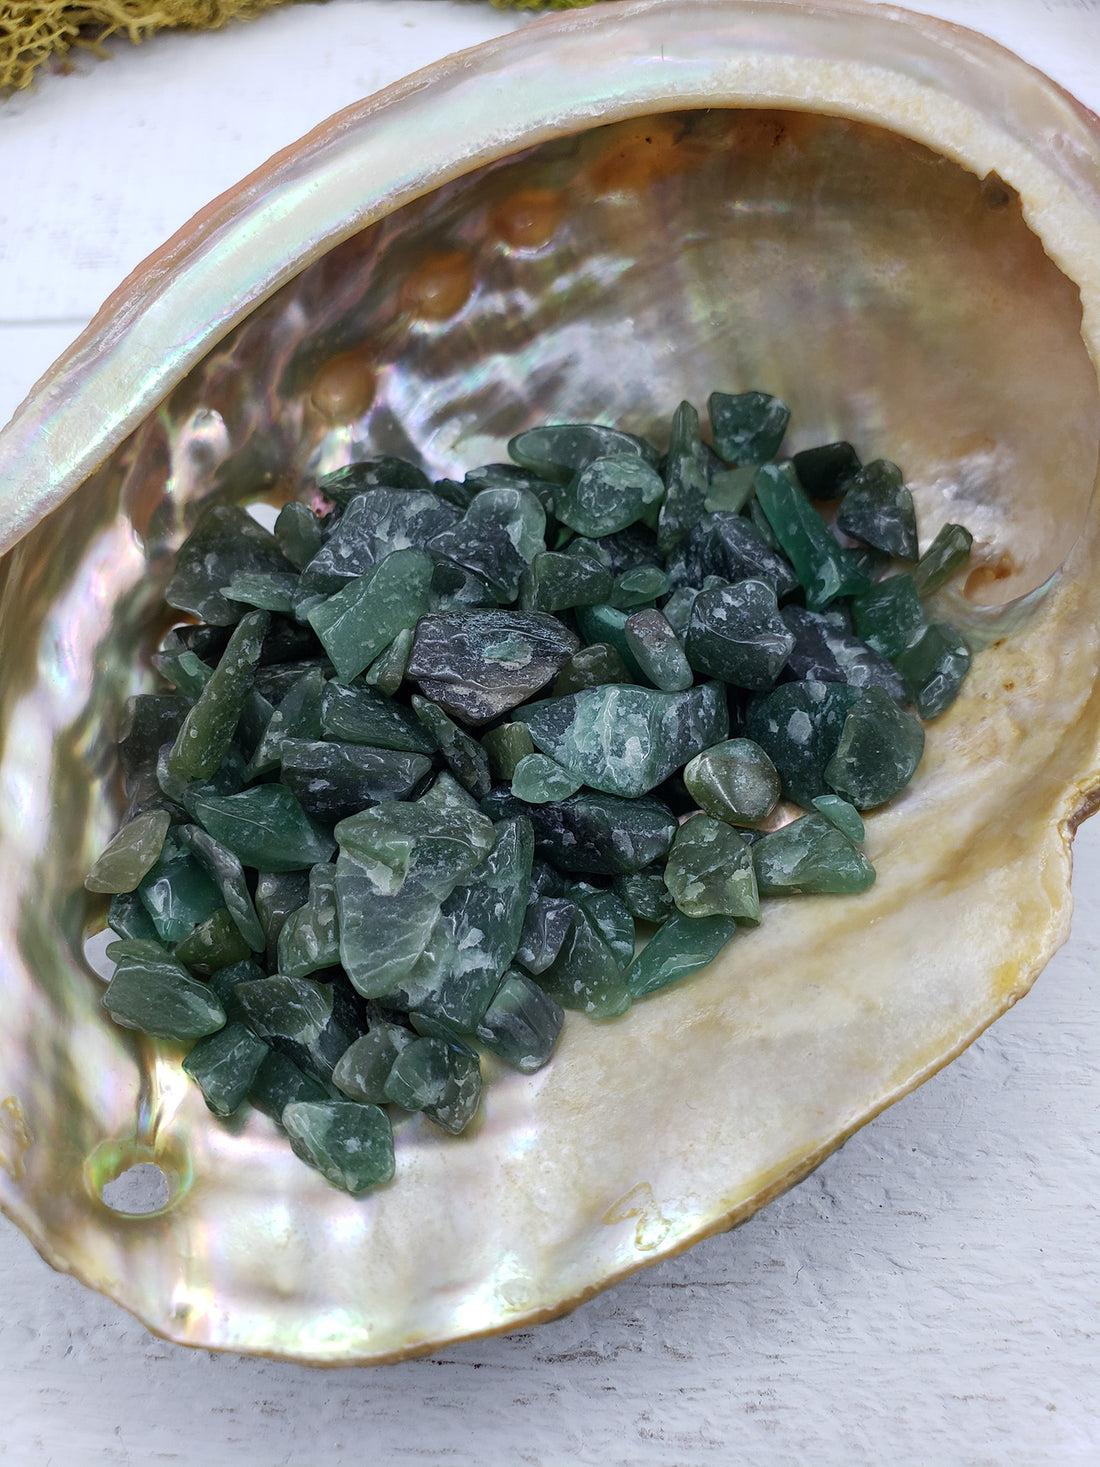 One ounce of green aventurine chips in abalone shell